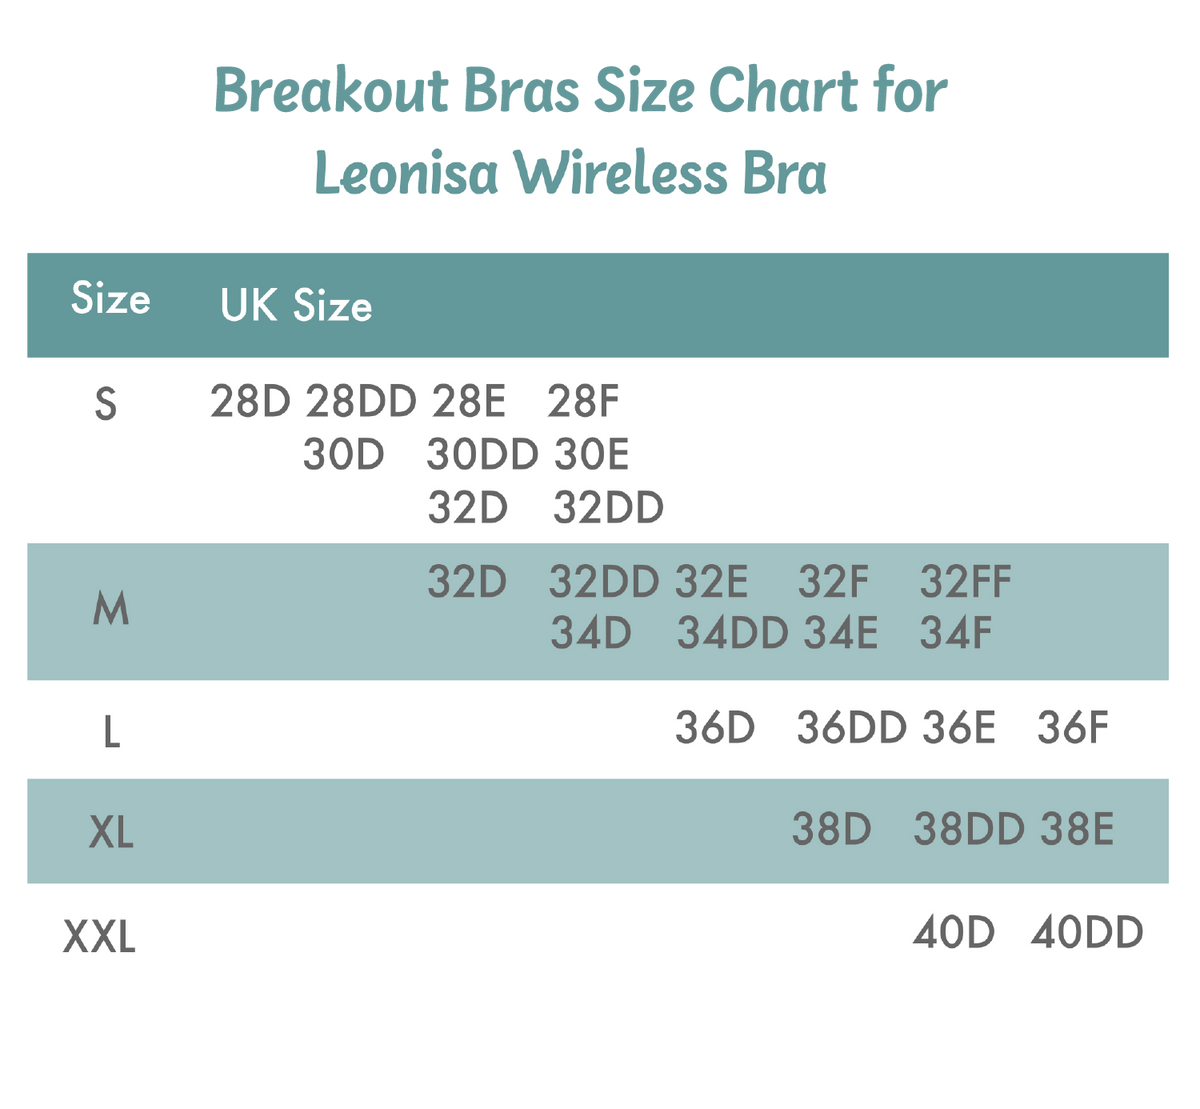 Leonisa Comfy Bra with Removable Pads (091031),Small,Black - Black,Small